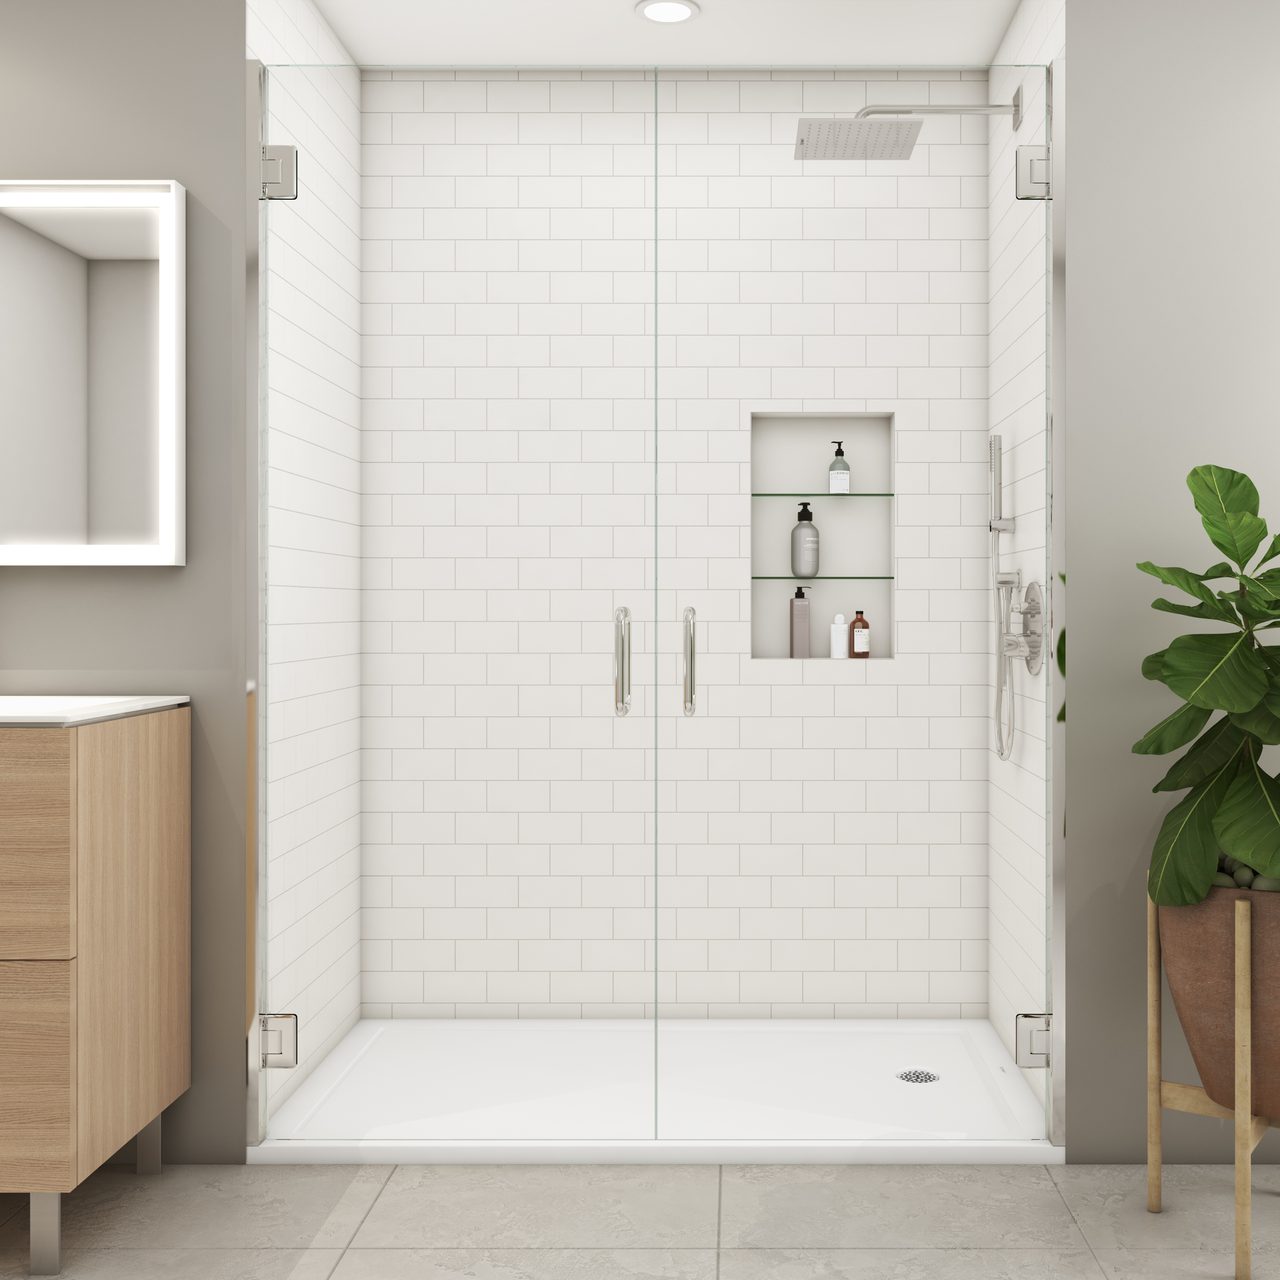 Pme 1121 Products Duravit